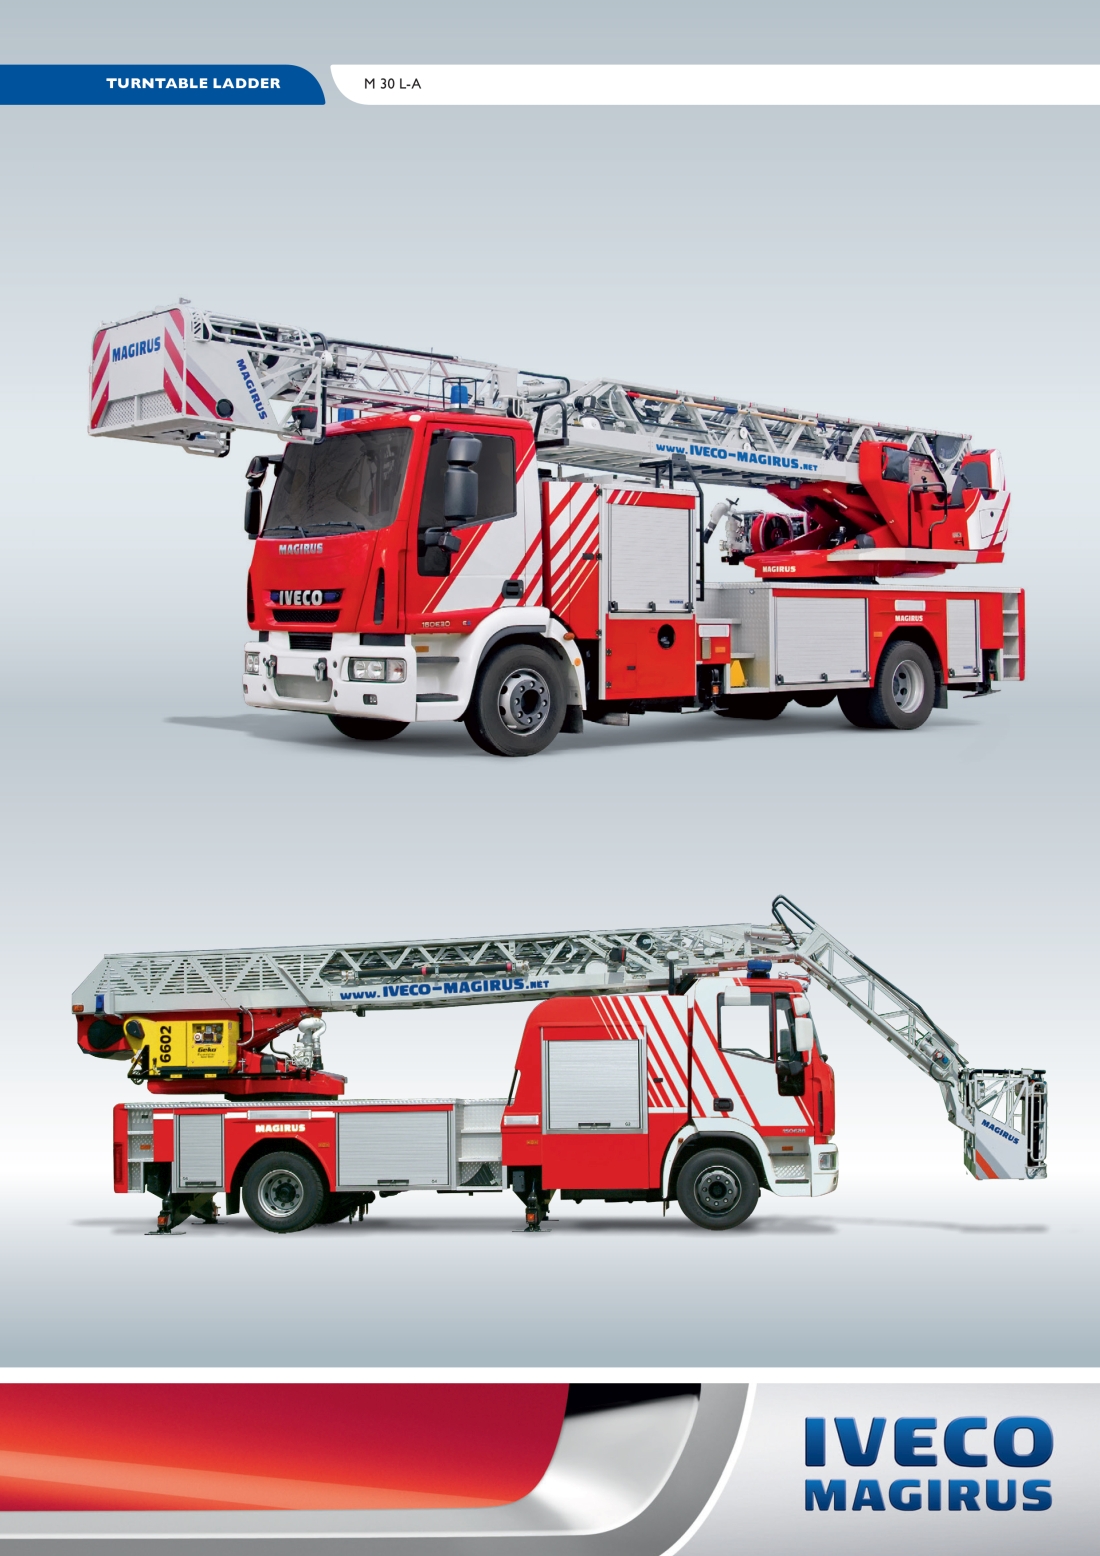 TURNTABLE LADDER M 30 L-A front